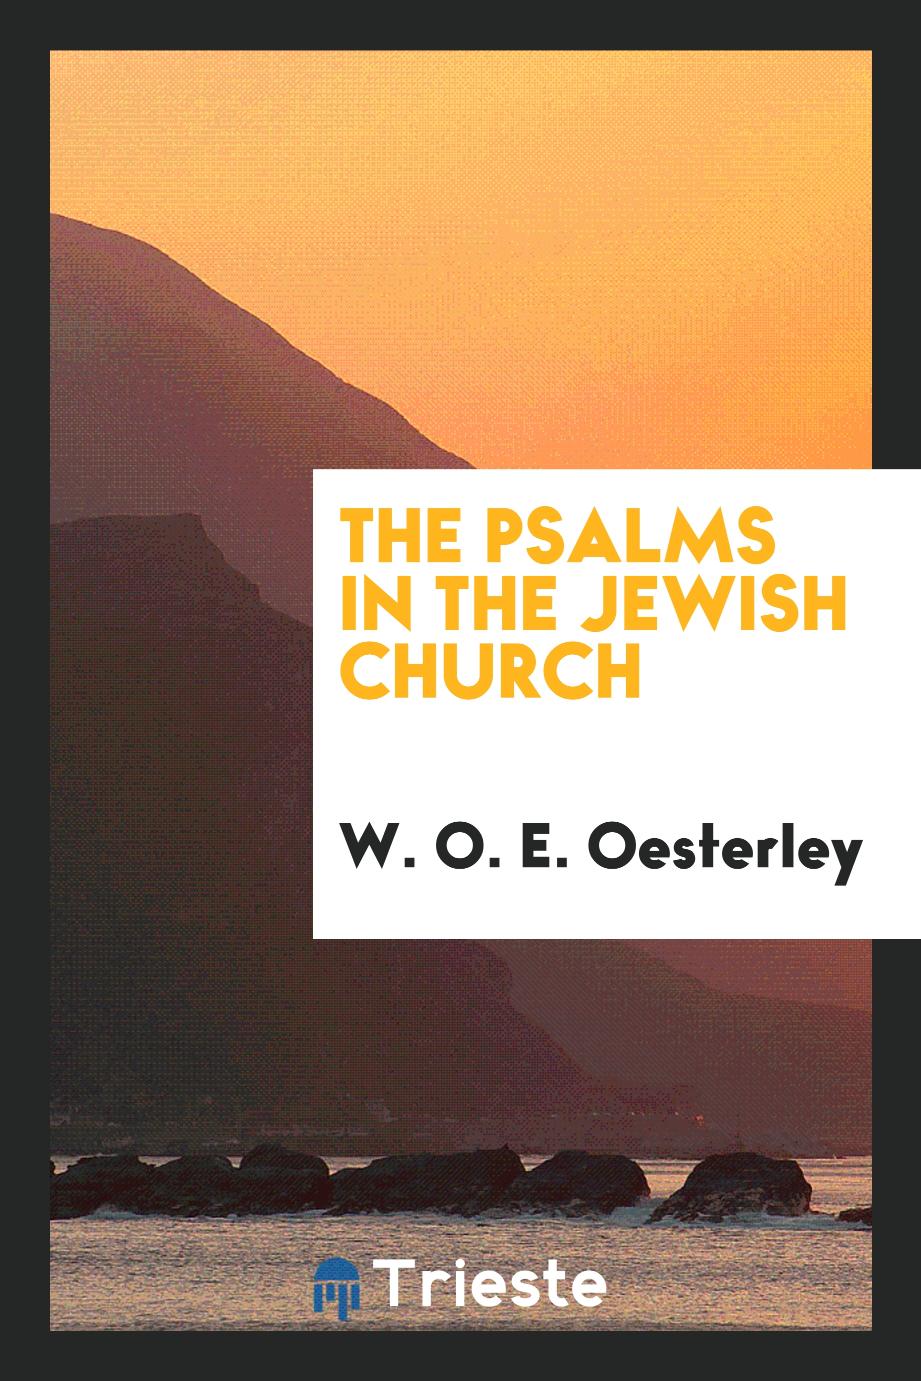 The psalms in the Jewish church